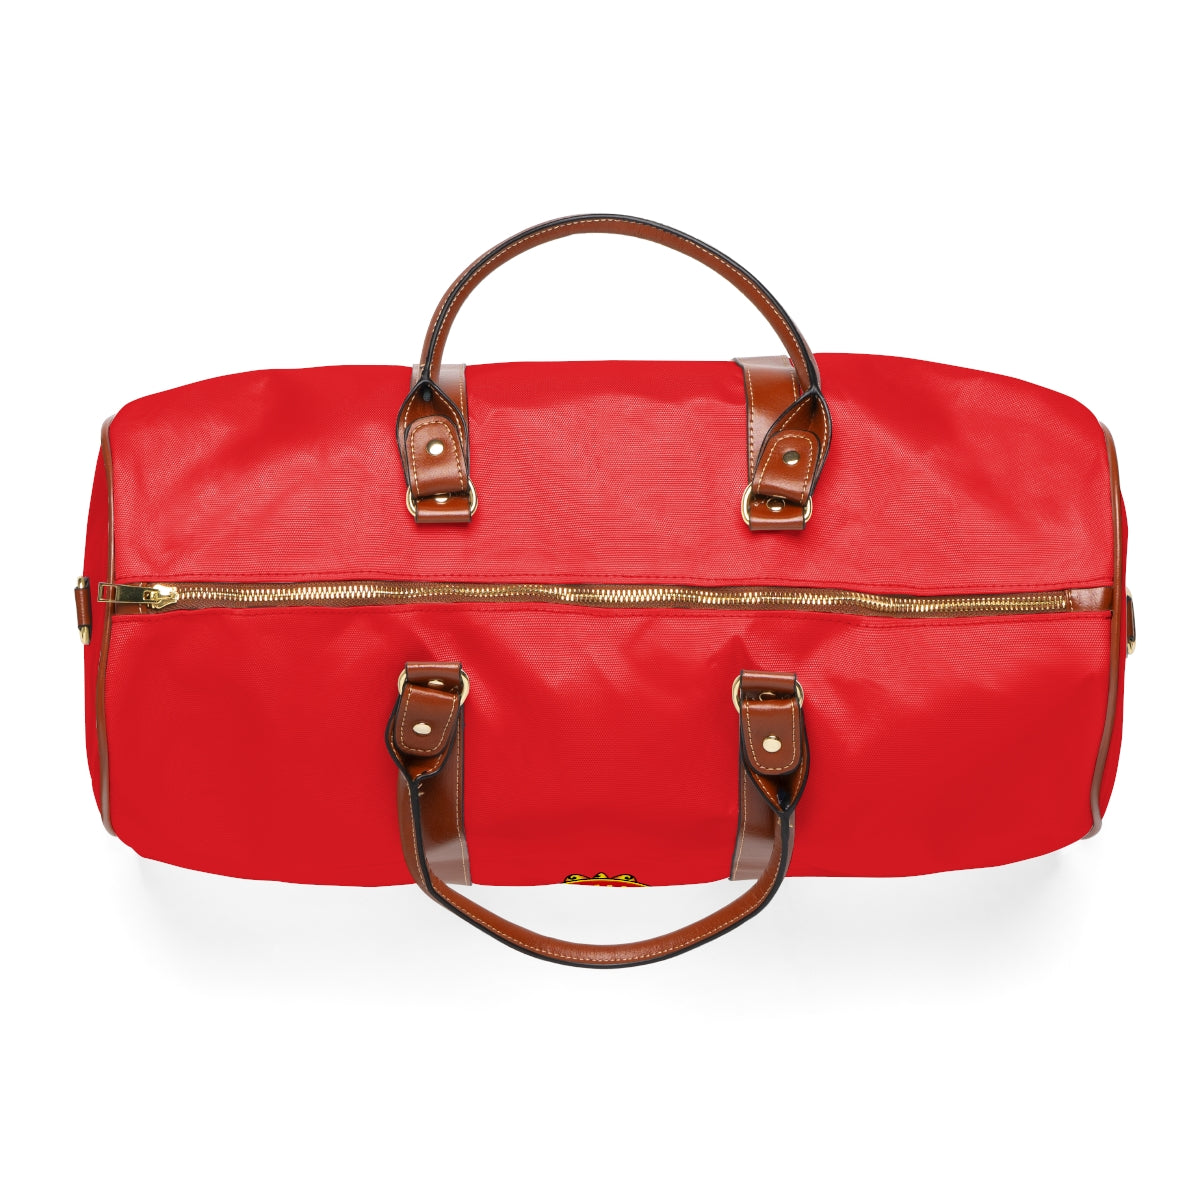 Manchester Waterproof Travel Bag - Red